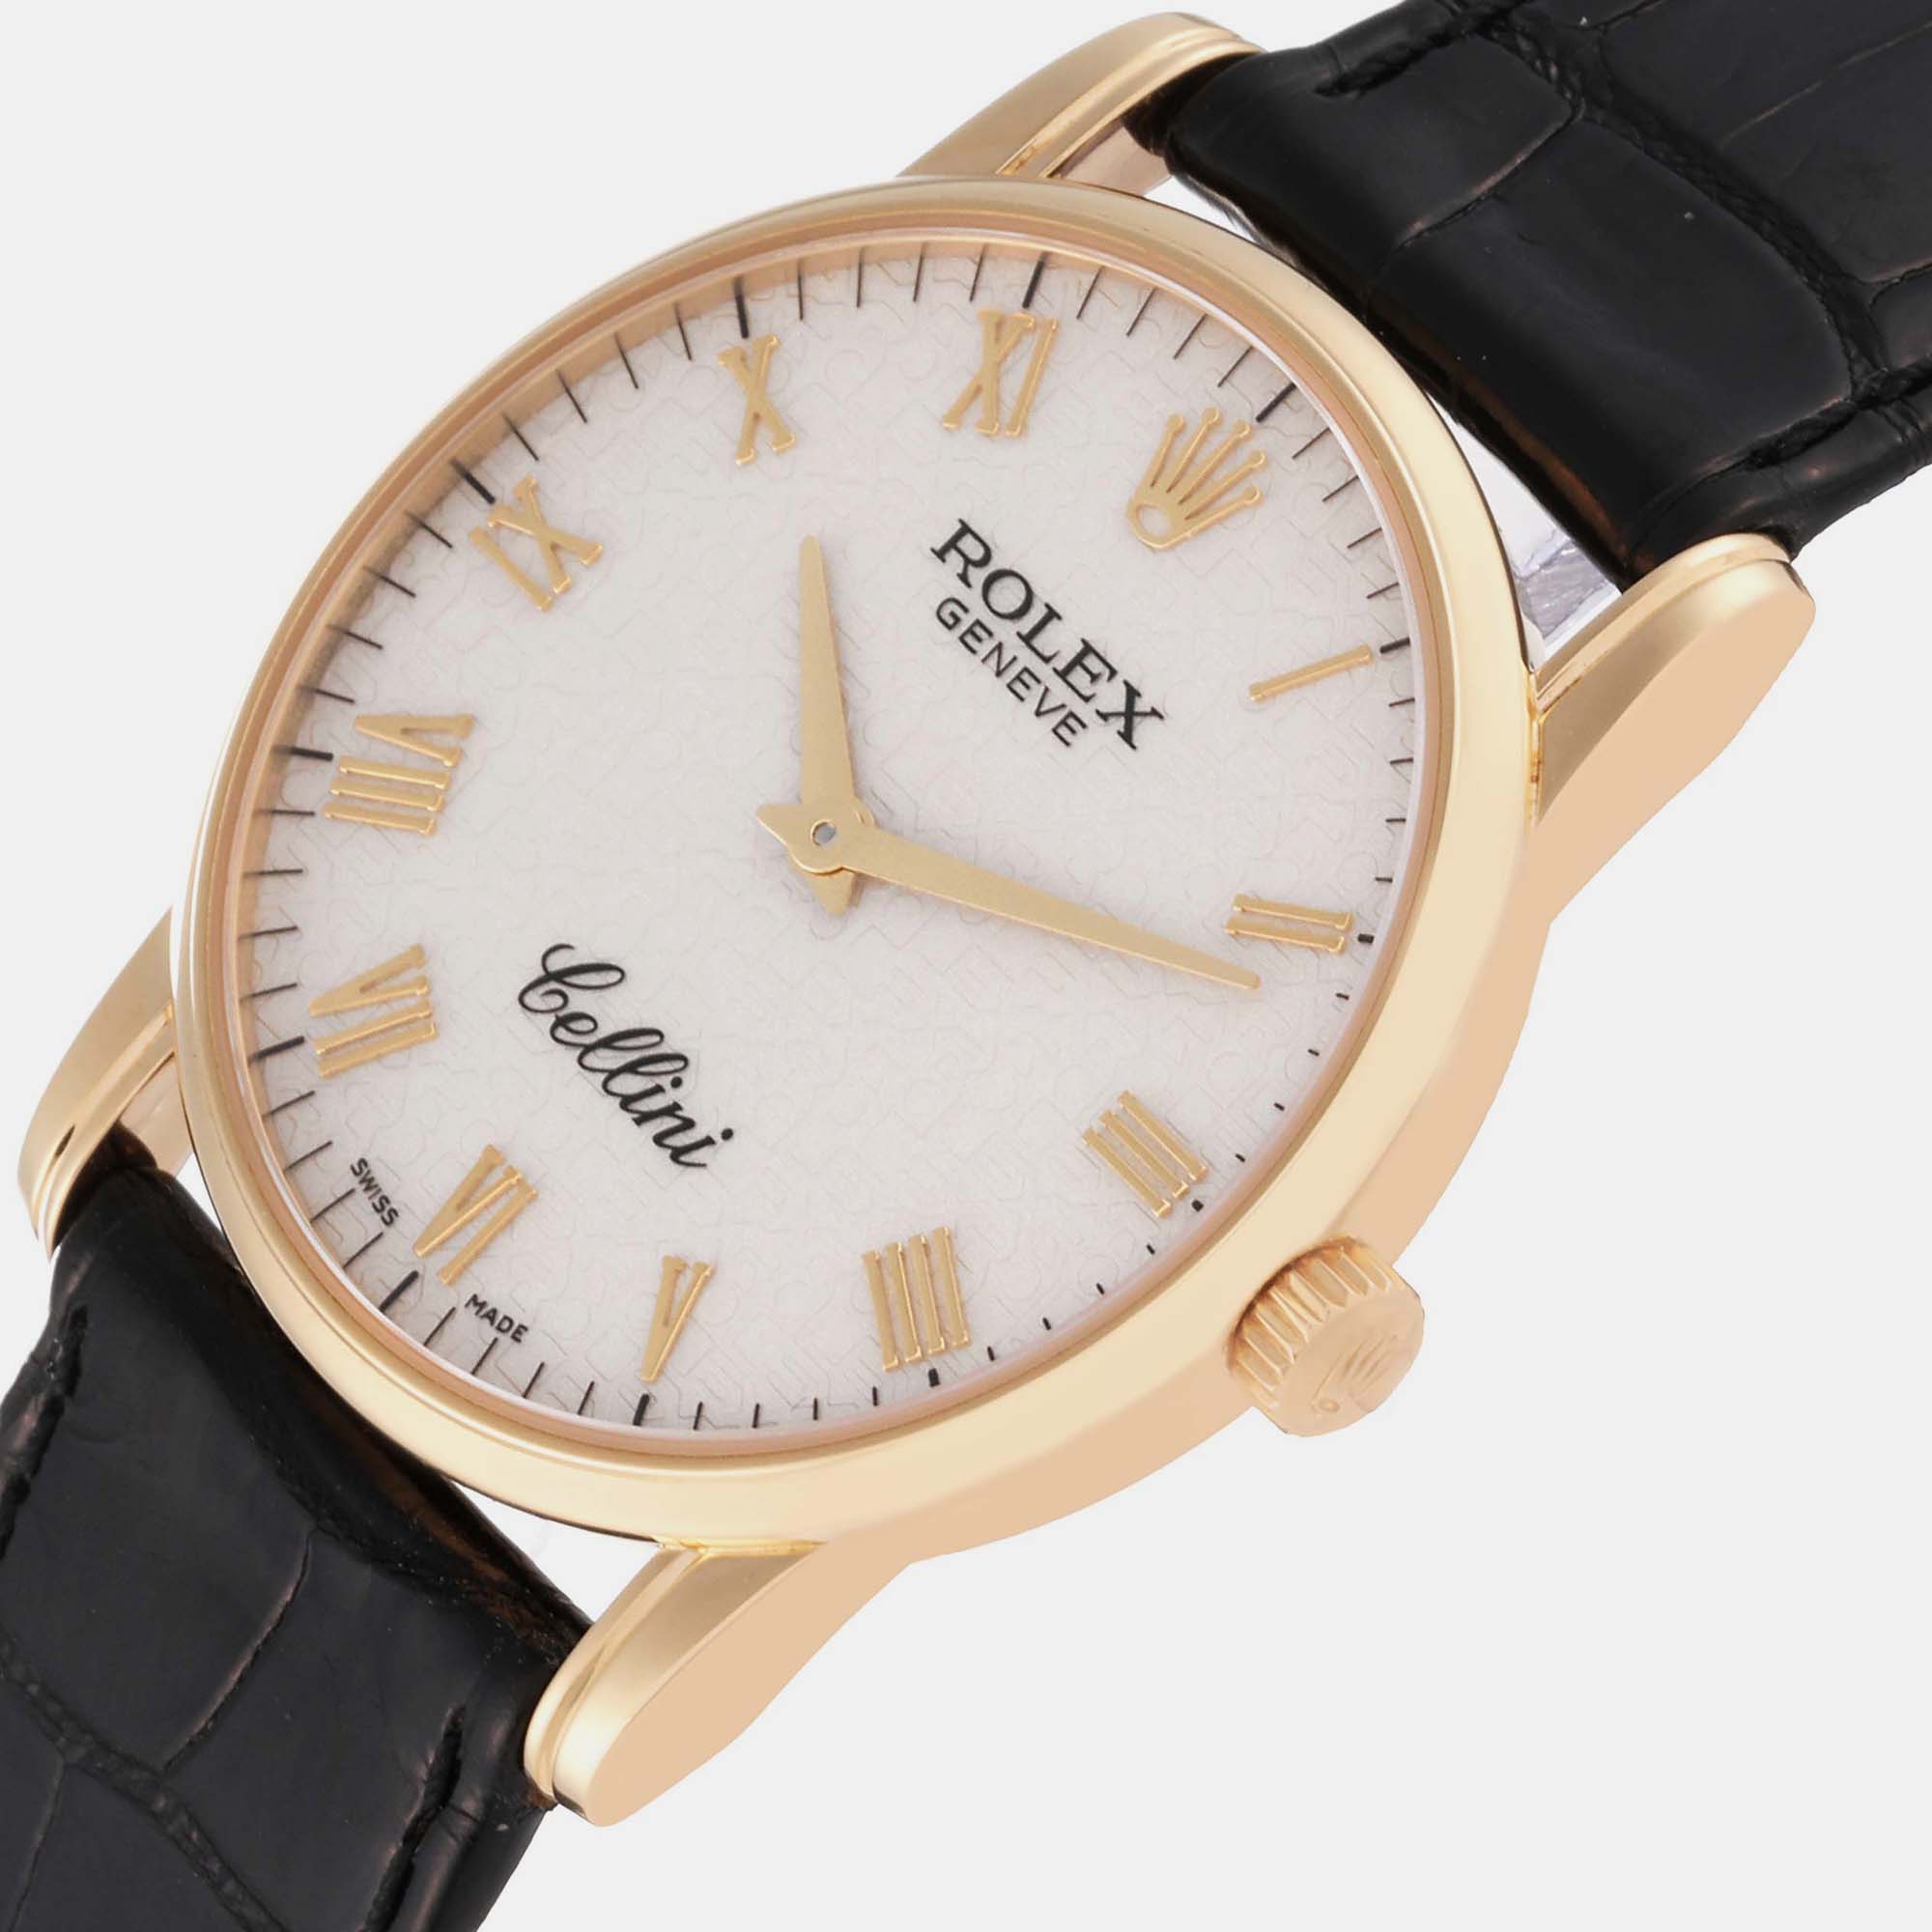 

Rolex Cellini Classic Yellow Gold Ivory Anniversary Dial Mens Watch 5116 31.8 mm x 5.5 mm, Cream